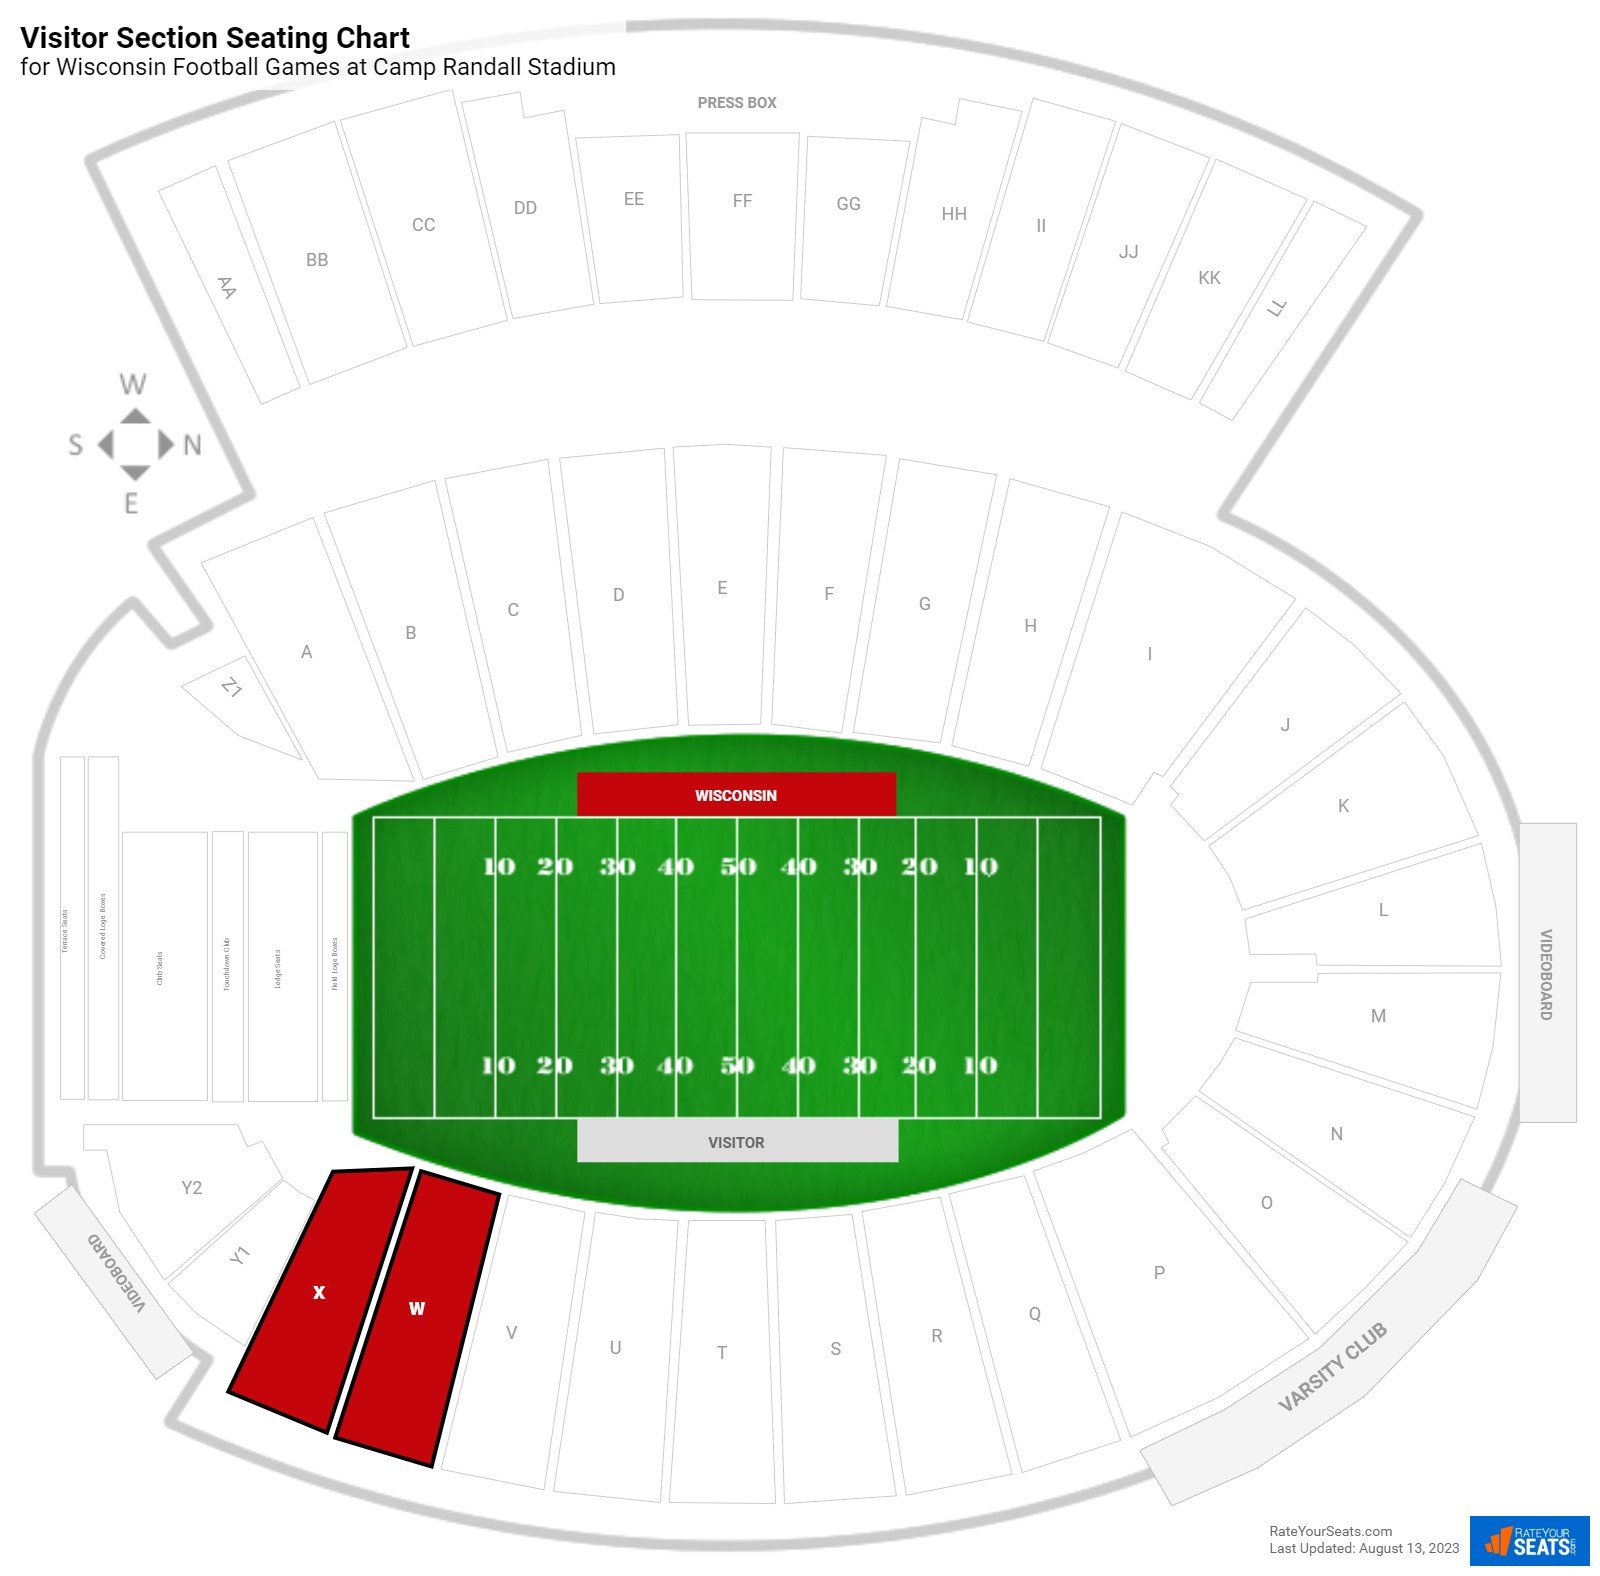 Camp Randall Seating Chart With Rows And Seat Numbers | Cabinets Matttroy